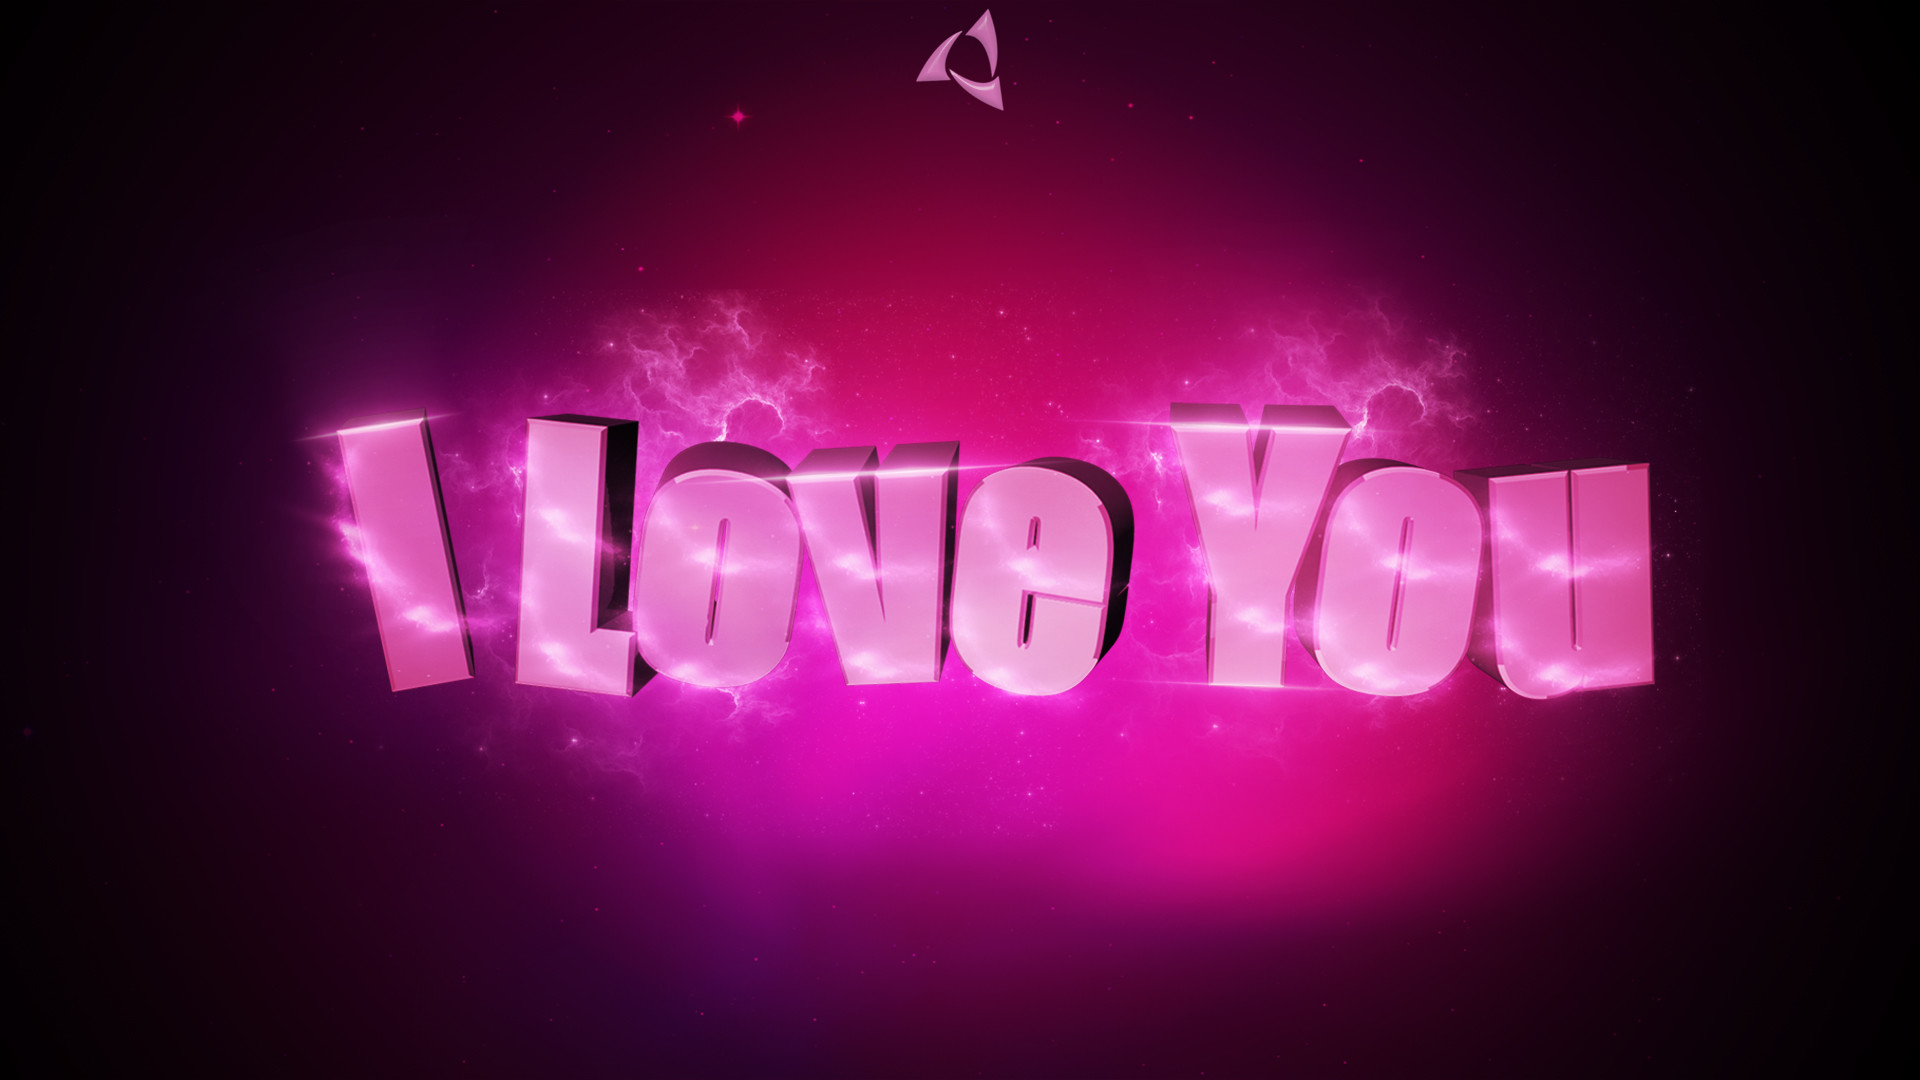 1920x1080 Wallpapers Of I Love You Wallpaper